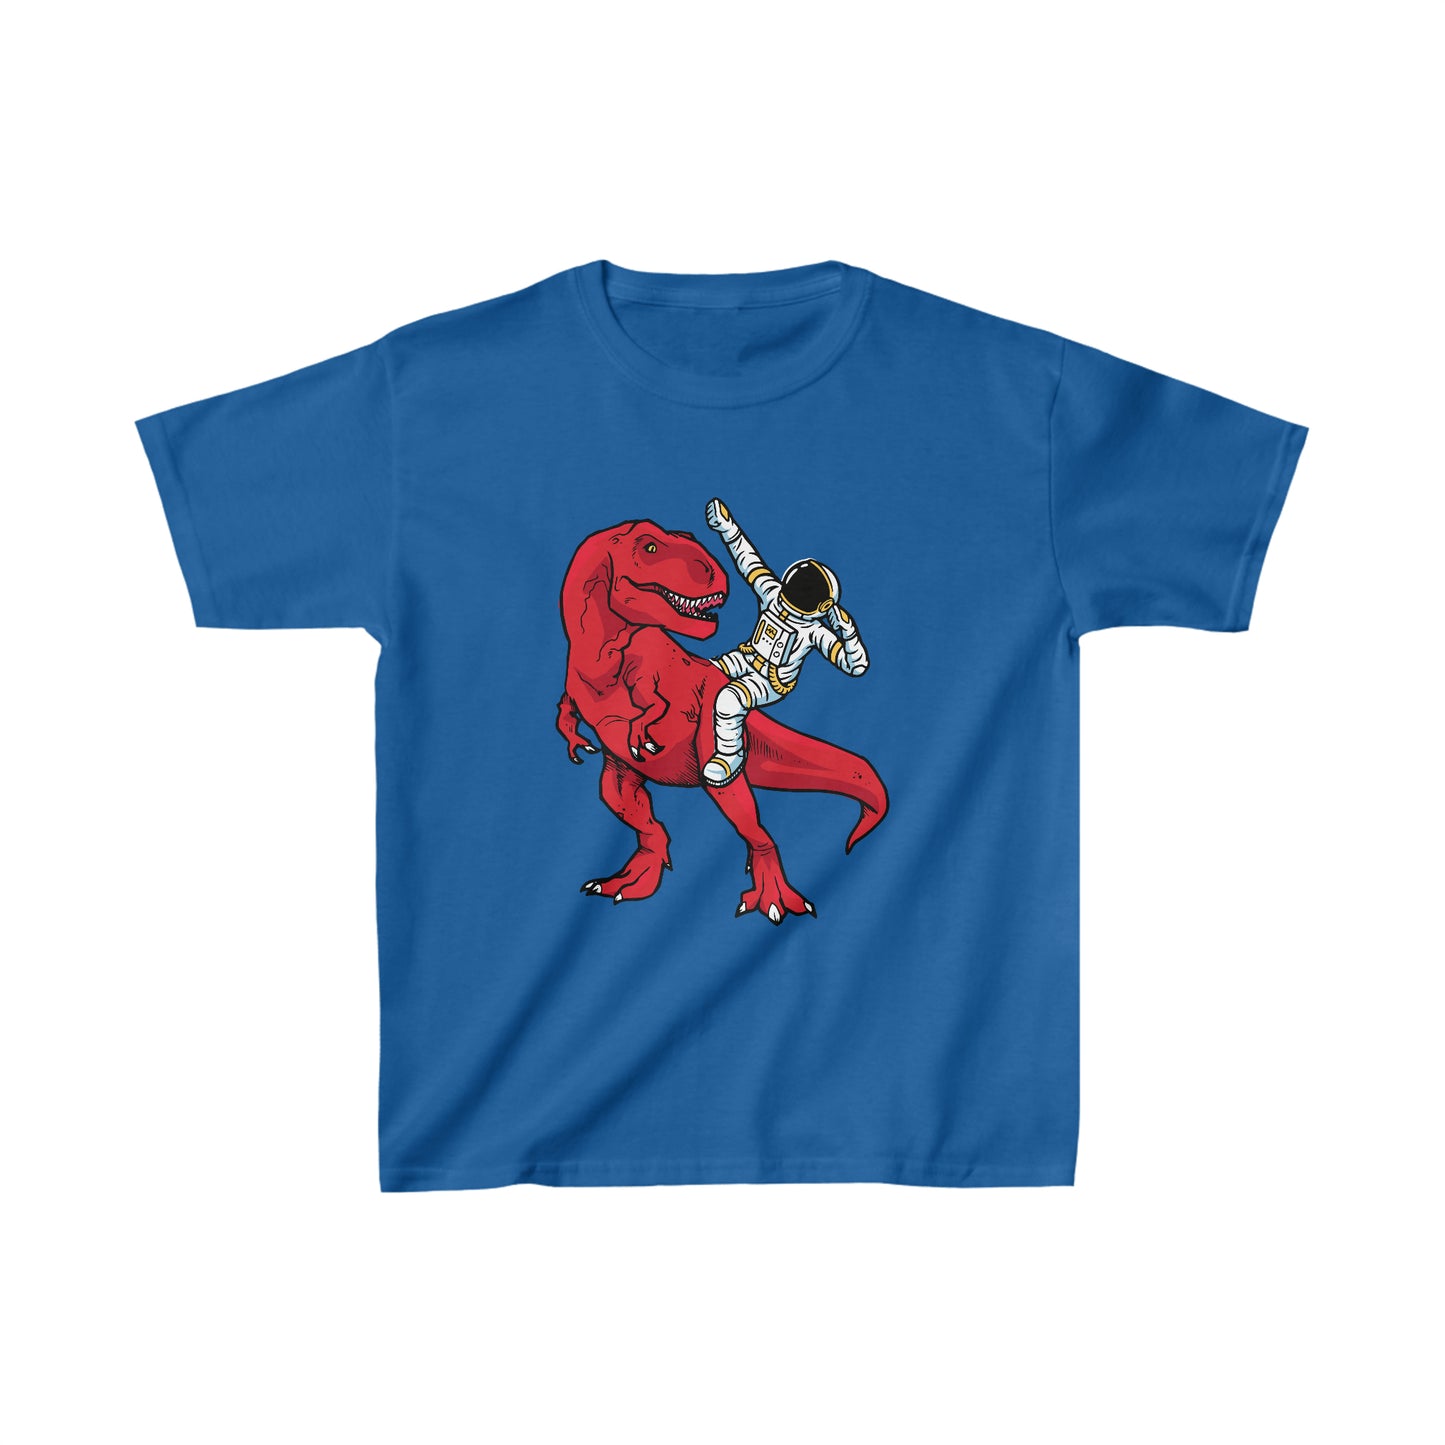 "T-Rex & Astronaut" Kids Shirt - Weave Got Gifts - Unique Gifts You Won’t Find Anywhere Else!